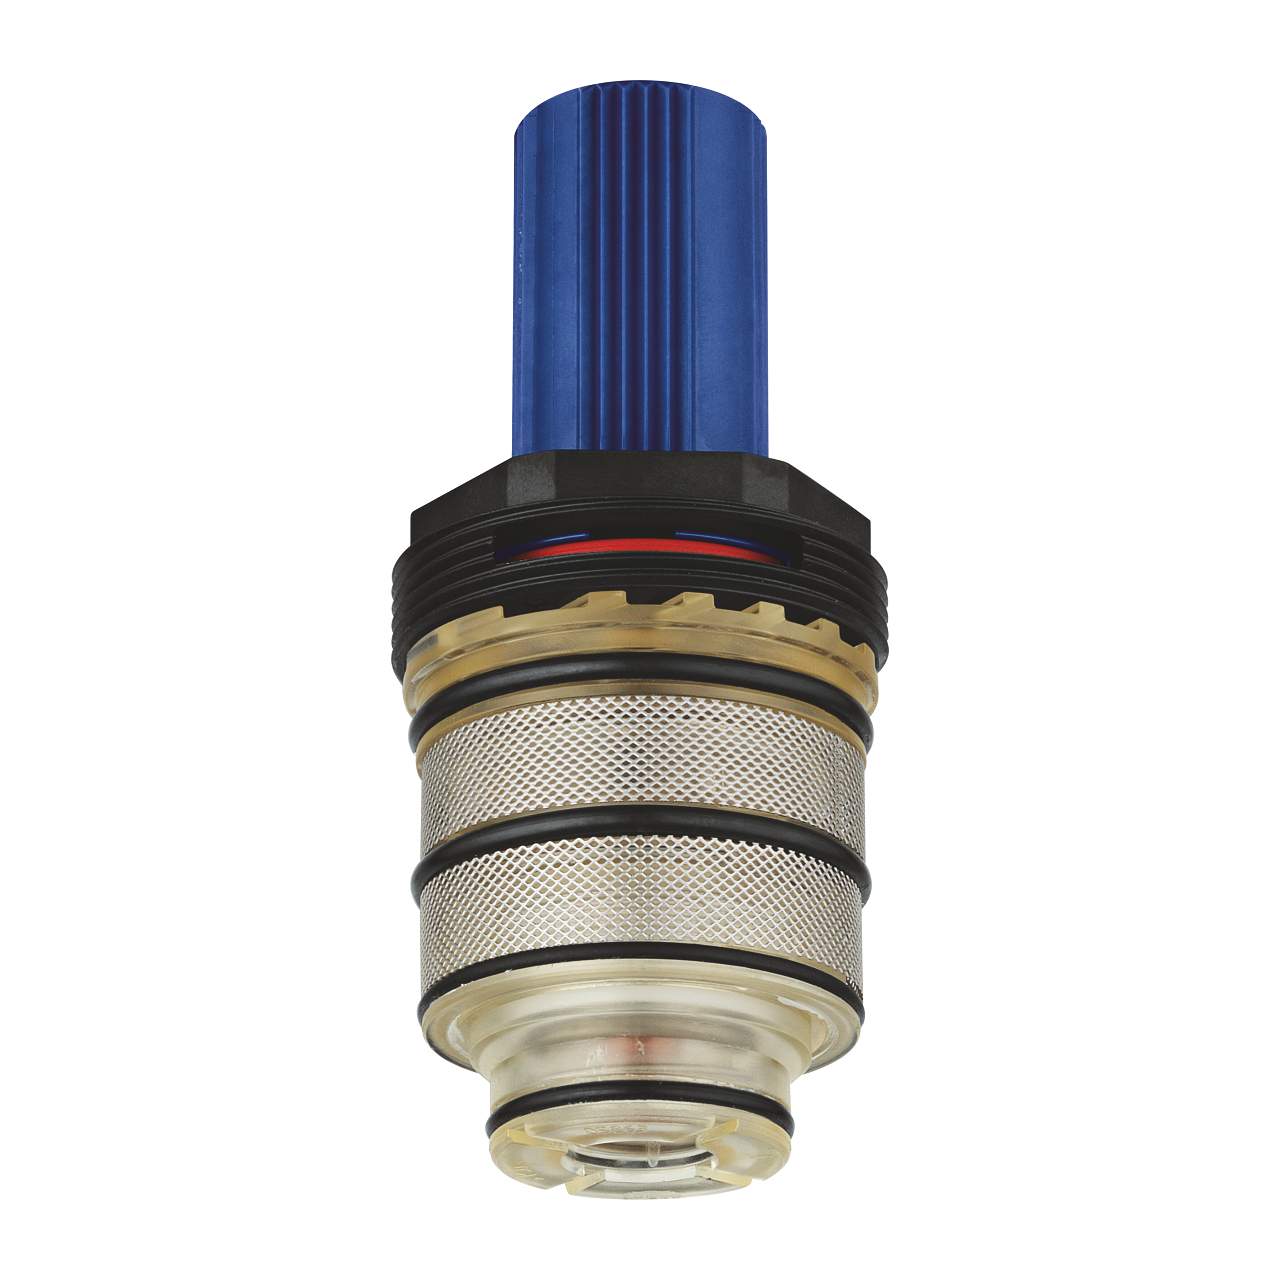 Thermostatic cartridge for Grotherm.